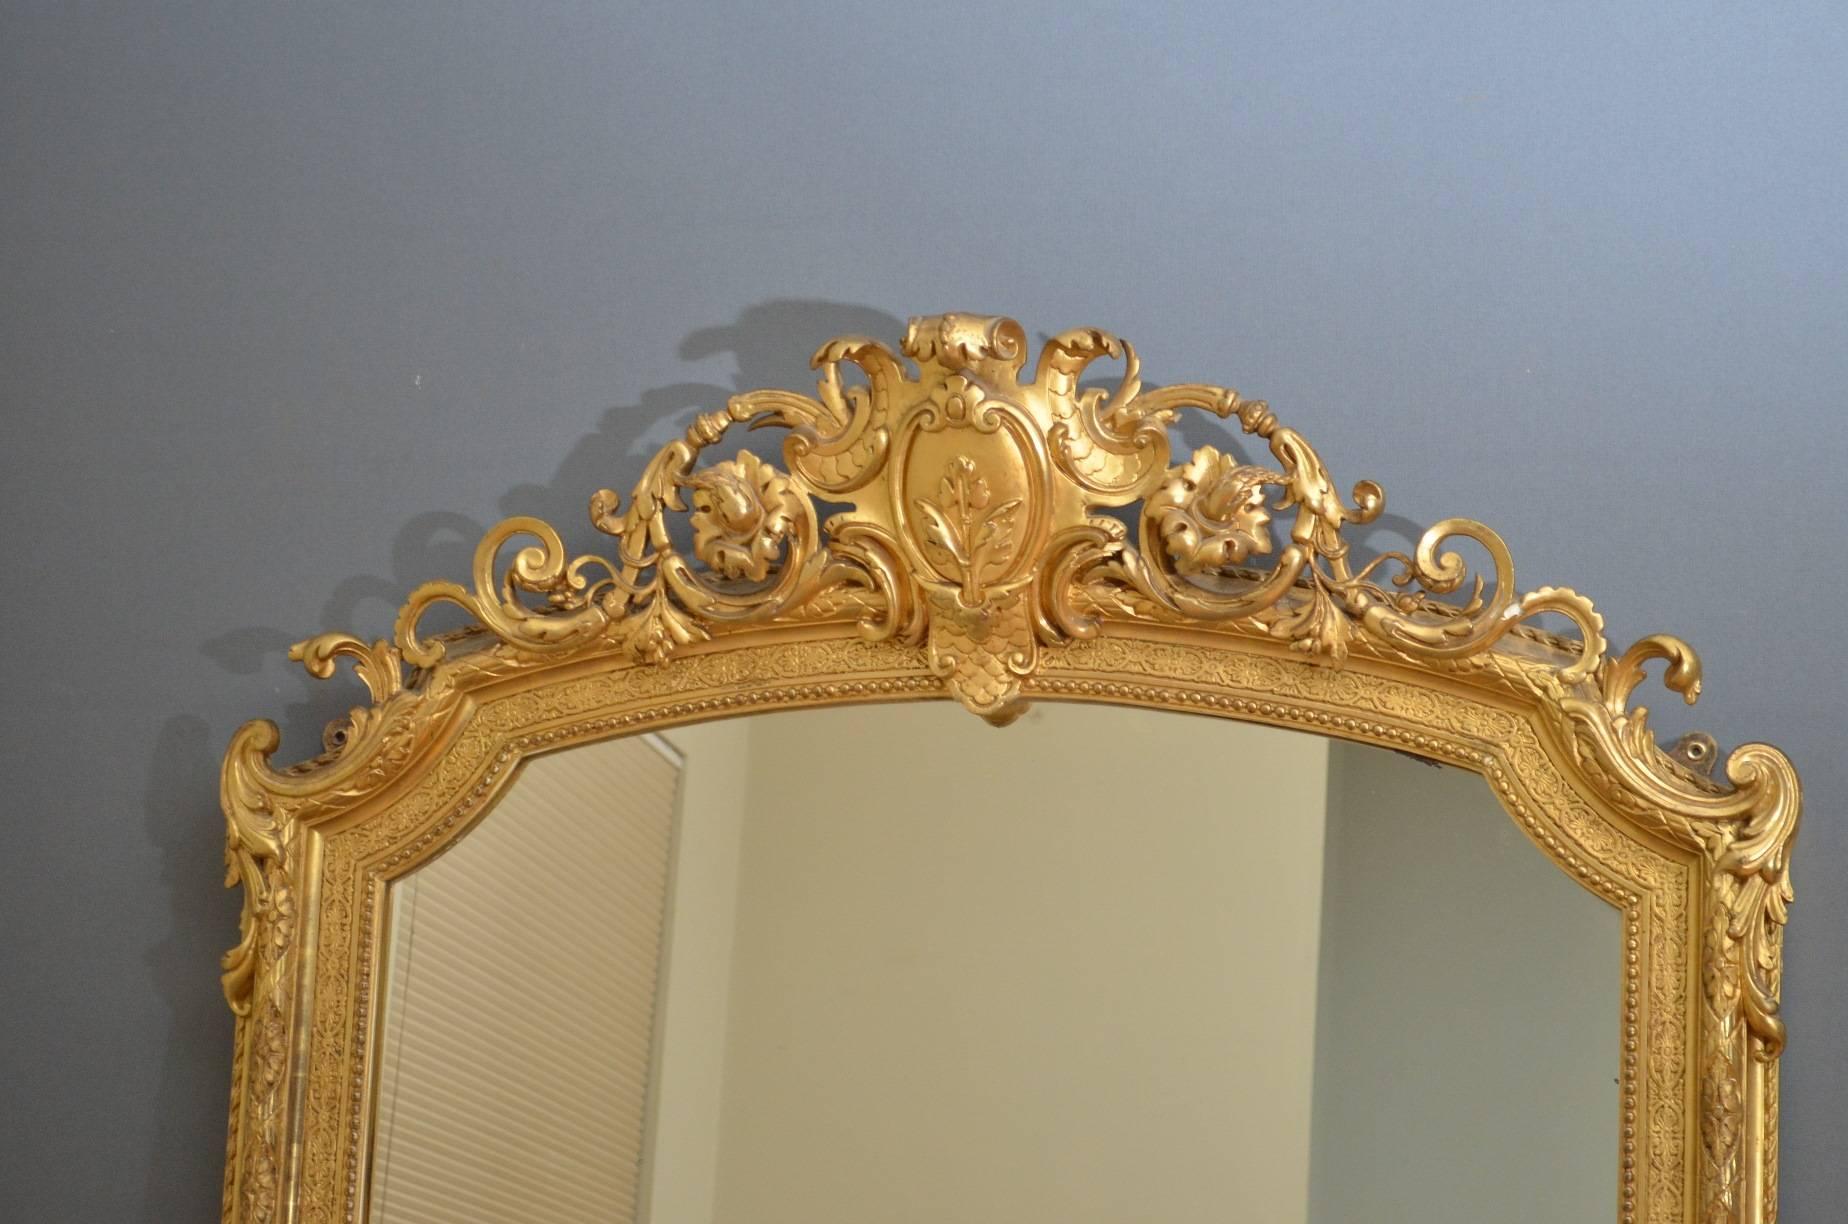 Sn4098, a fine quality and very elegant early Victorian period giltwood mirror of narrow proportions, having shaped mirror plate in finely carved frame. This excellent wall mirror retains original gilt throughout, all in wonderful condition, ready